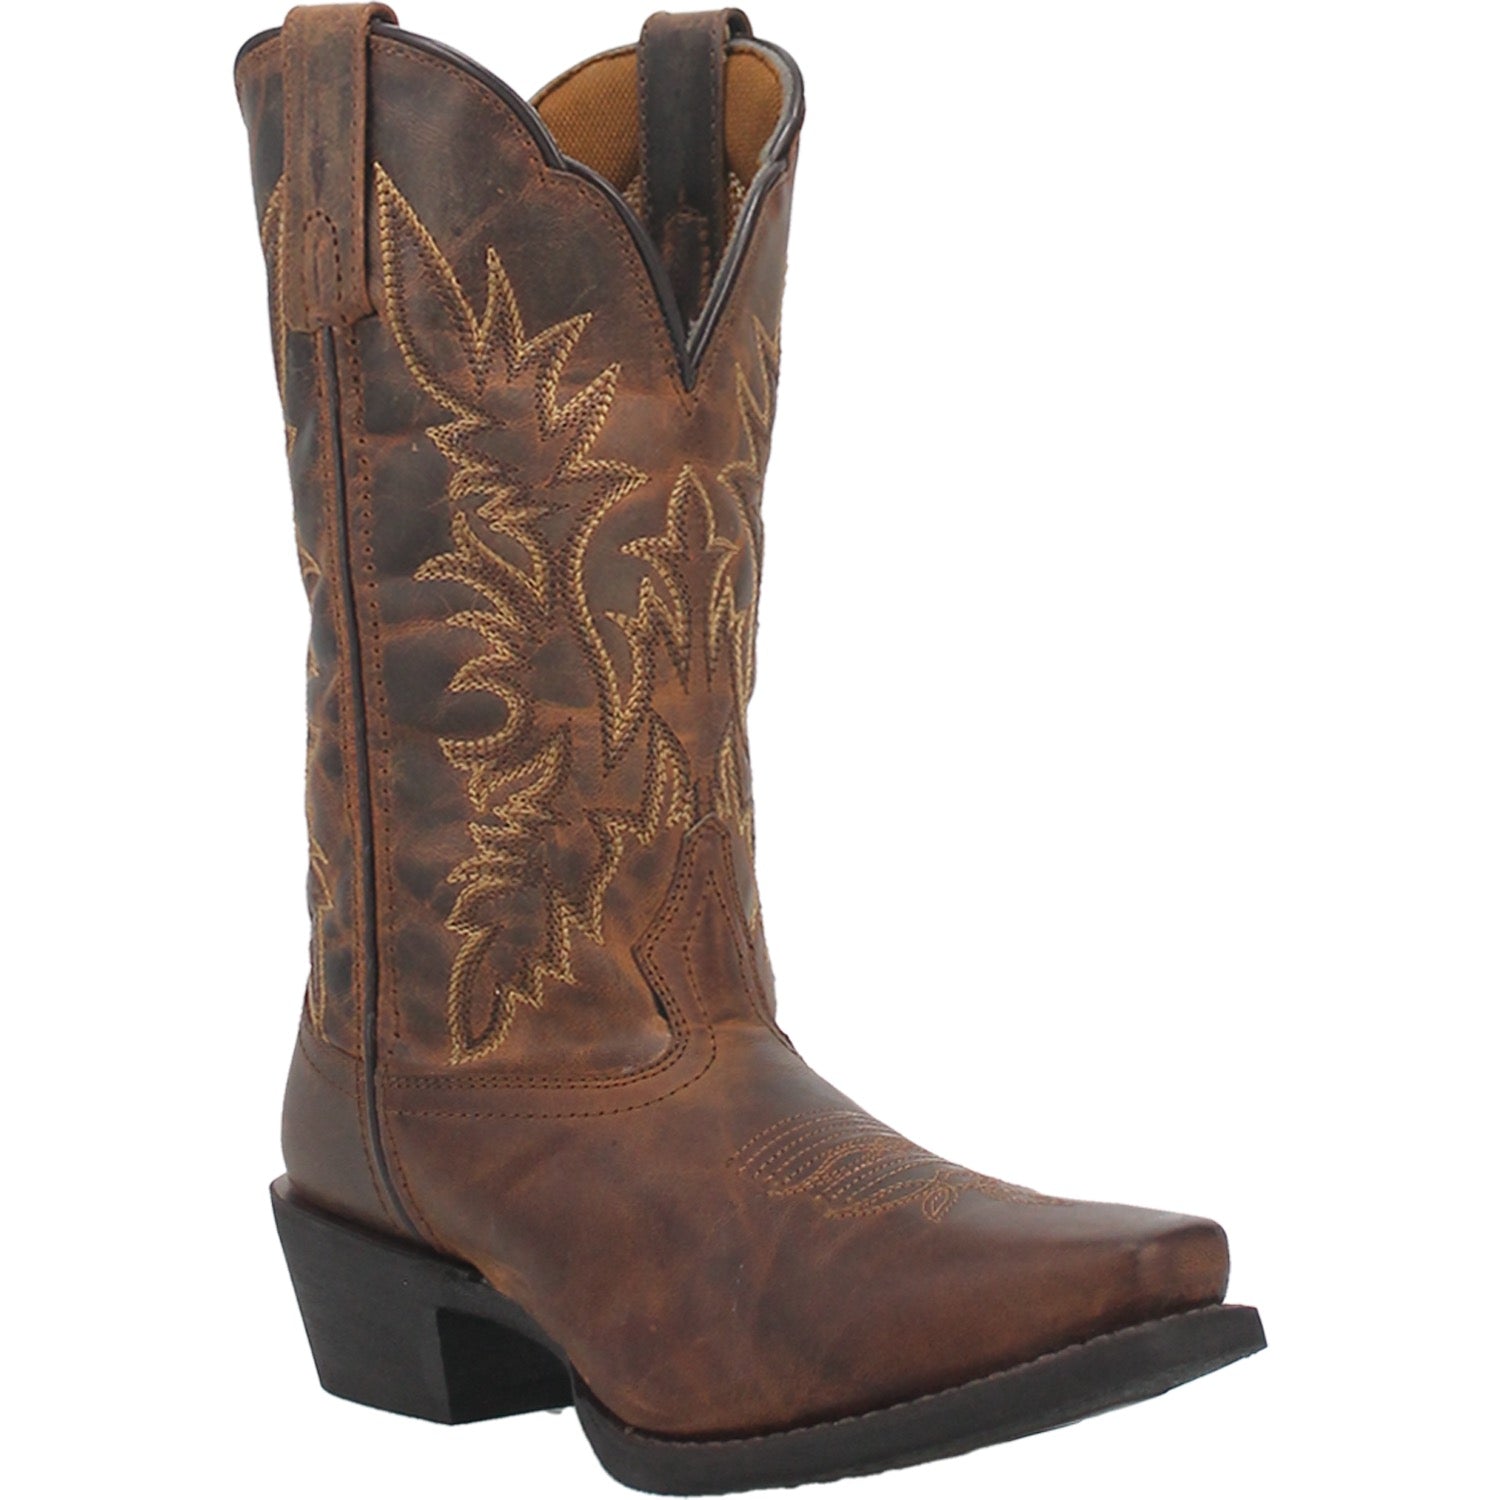 MALINDA LEATHER BOOT Cover